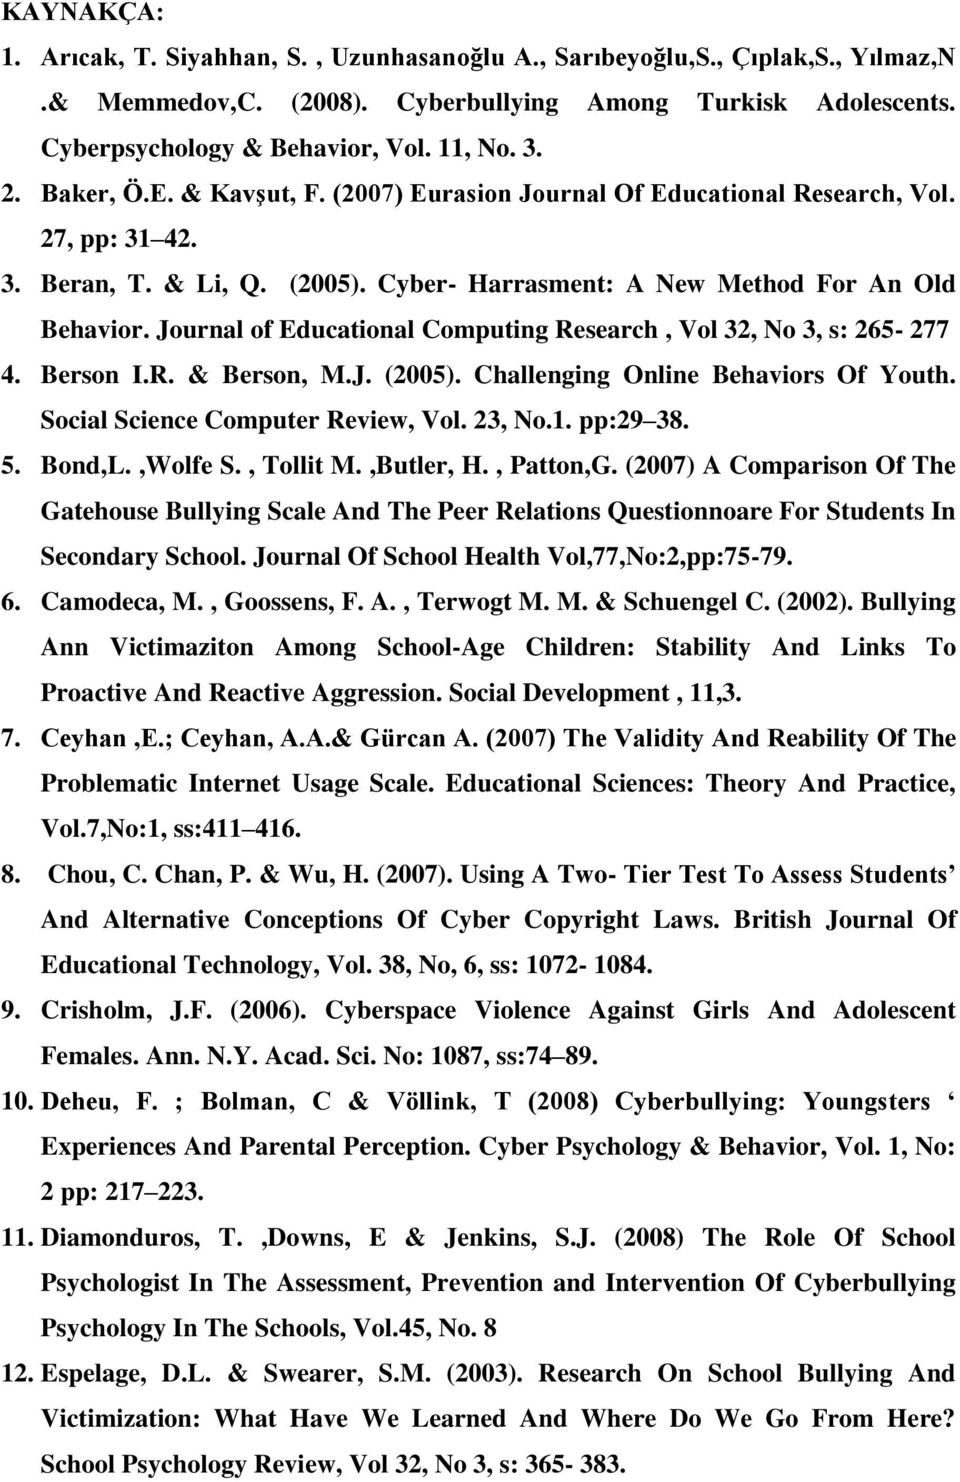 Journal of Educational Computing Research, Vol 32, No 3, s: 265-277 4. Berson I.R. & Berson, M.J. (2005). Challenging Online Behaviors Of Youth. Social Science Computer Review, Vol. 23, No.1.